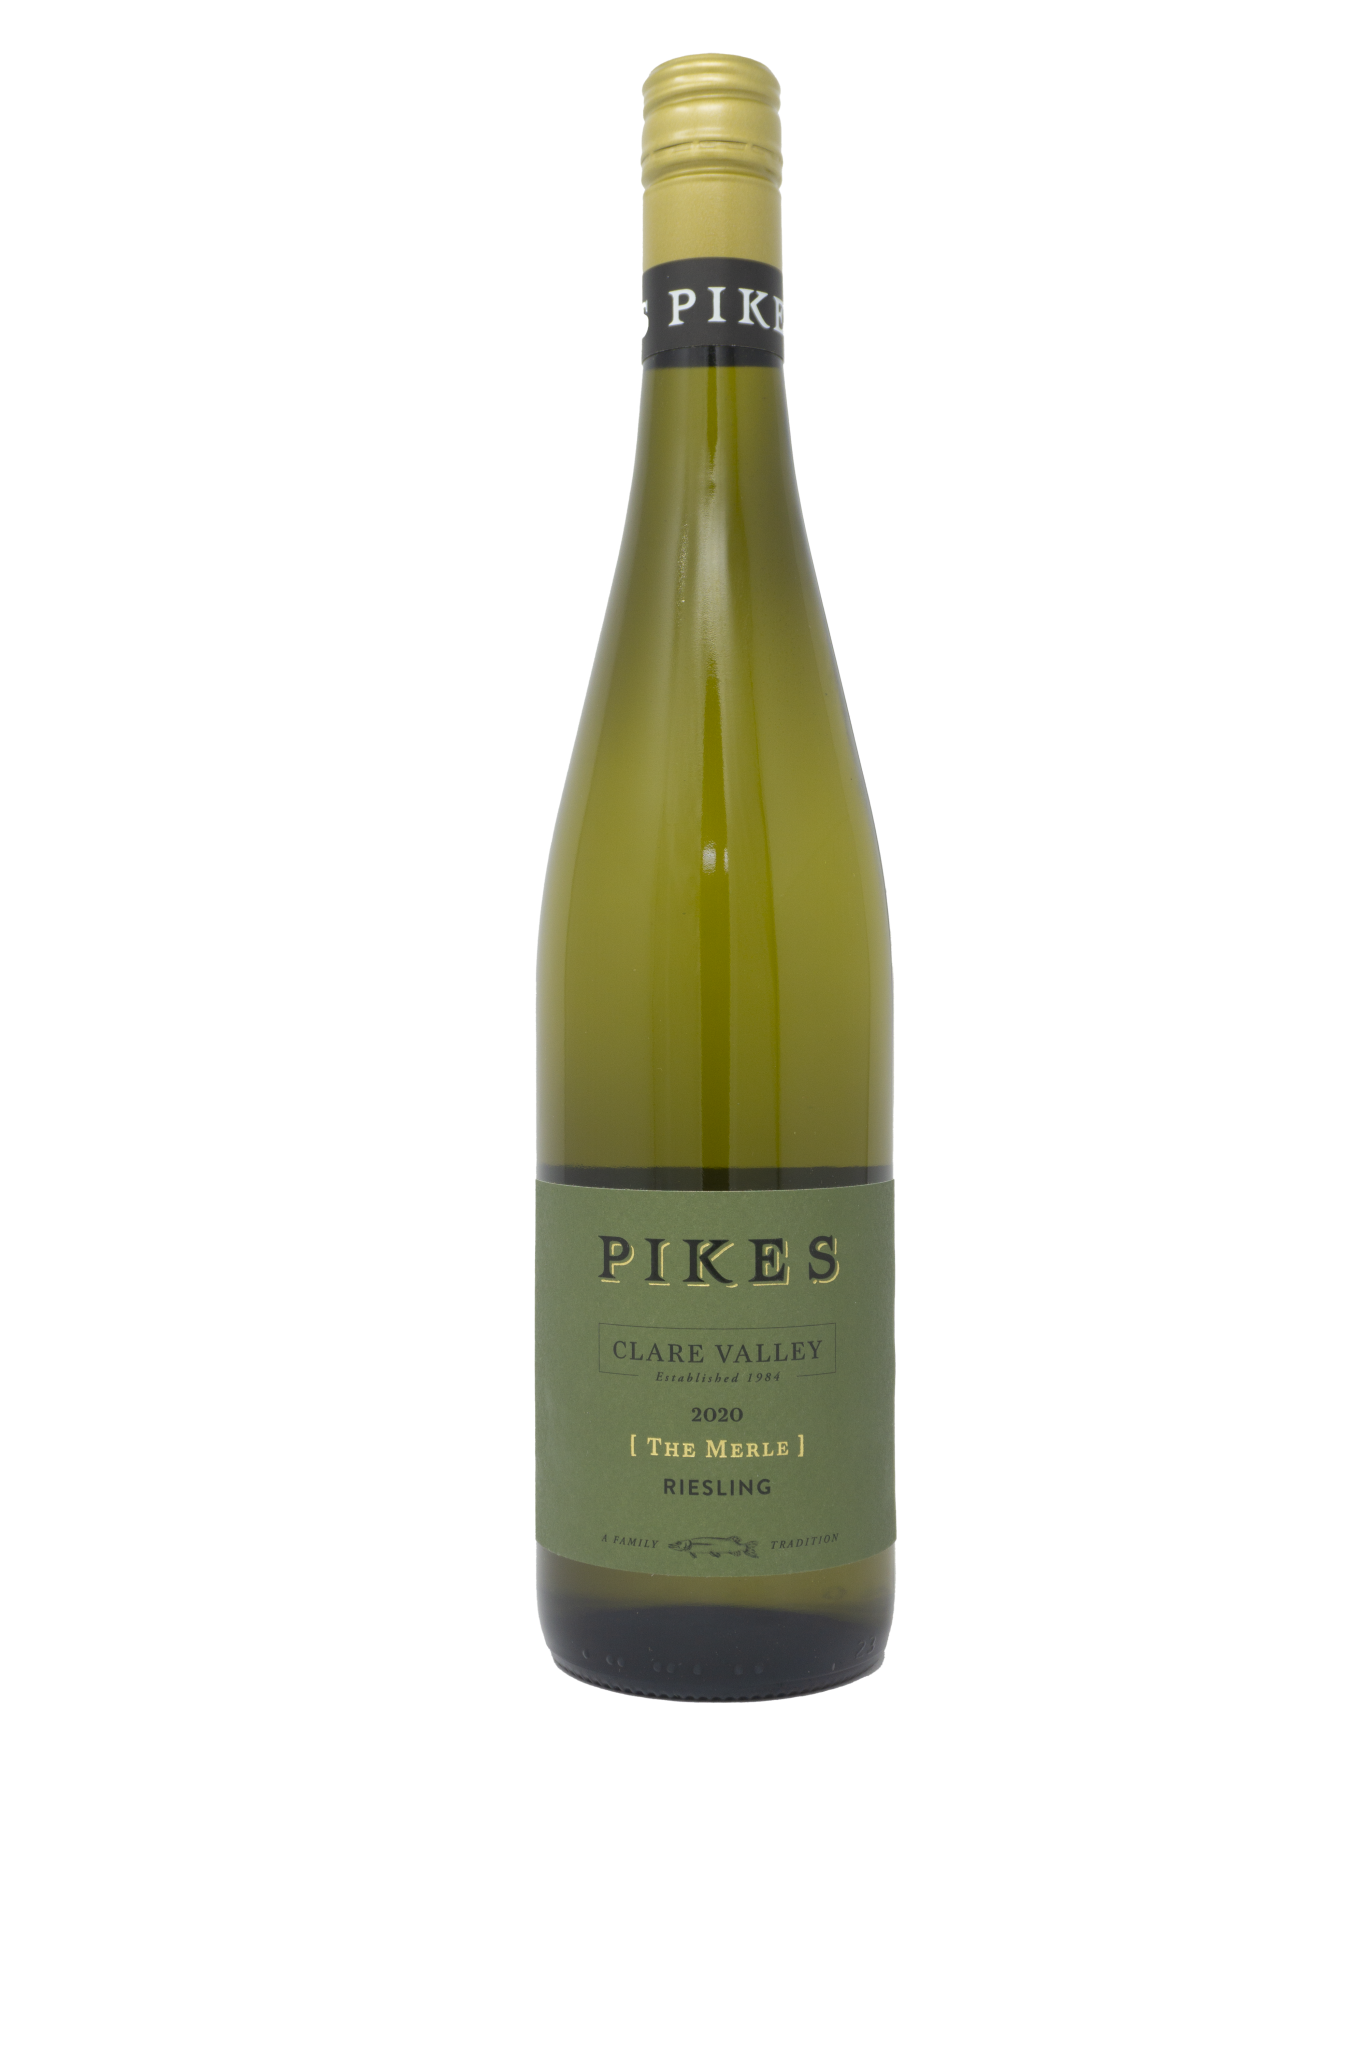 Pikes 'The Merle' Riesling 